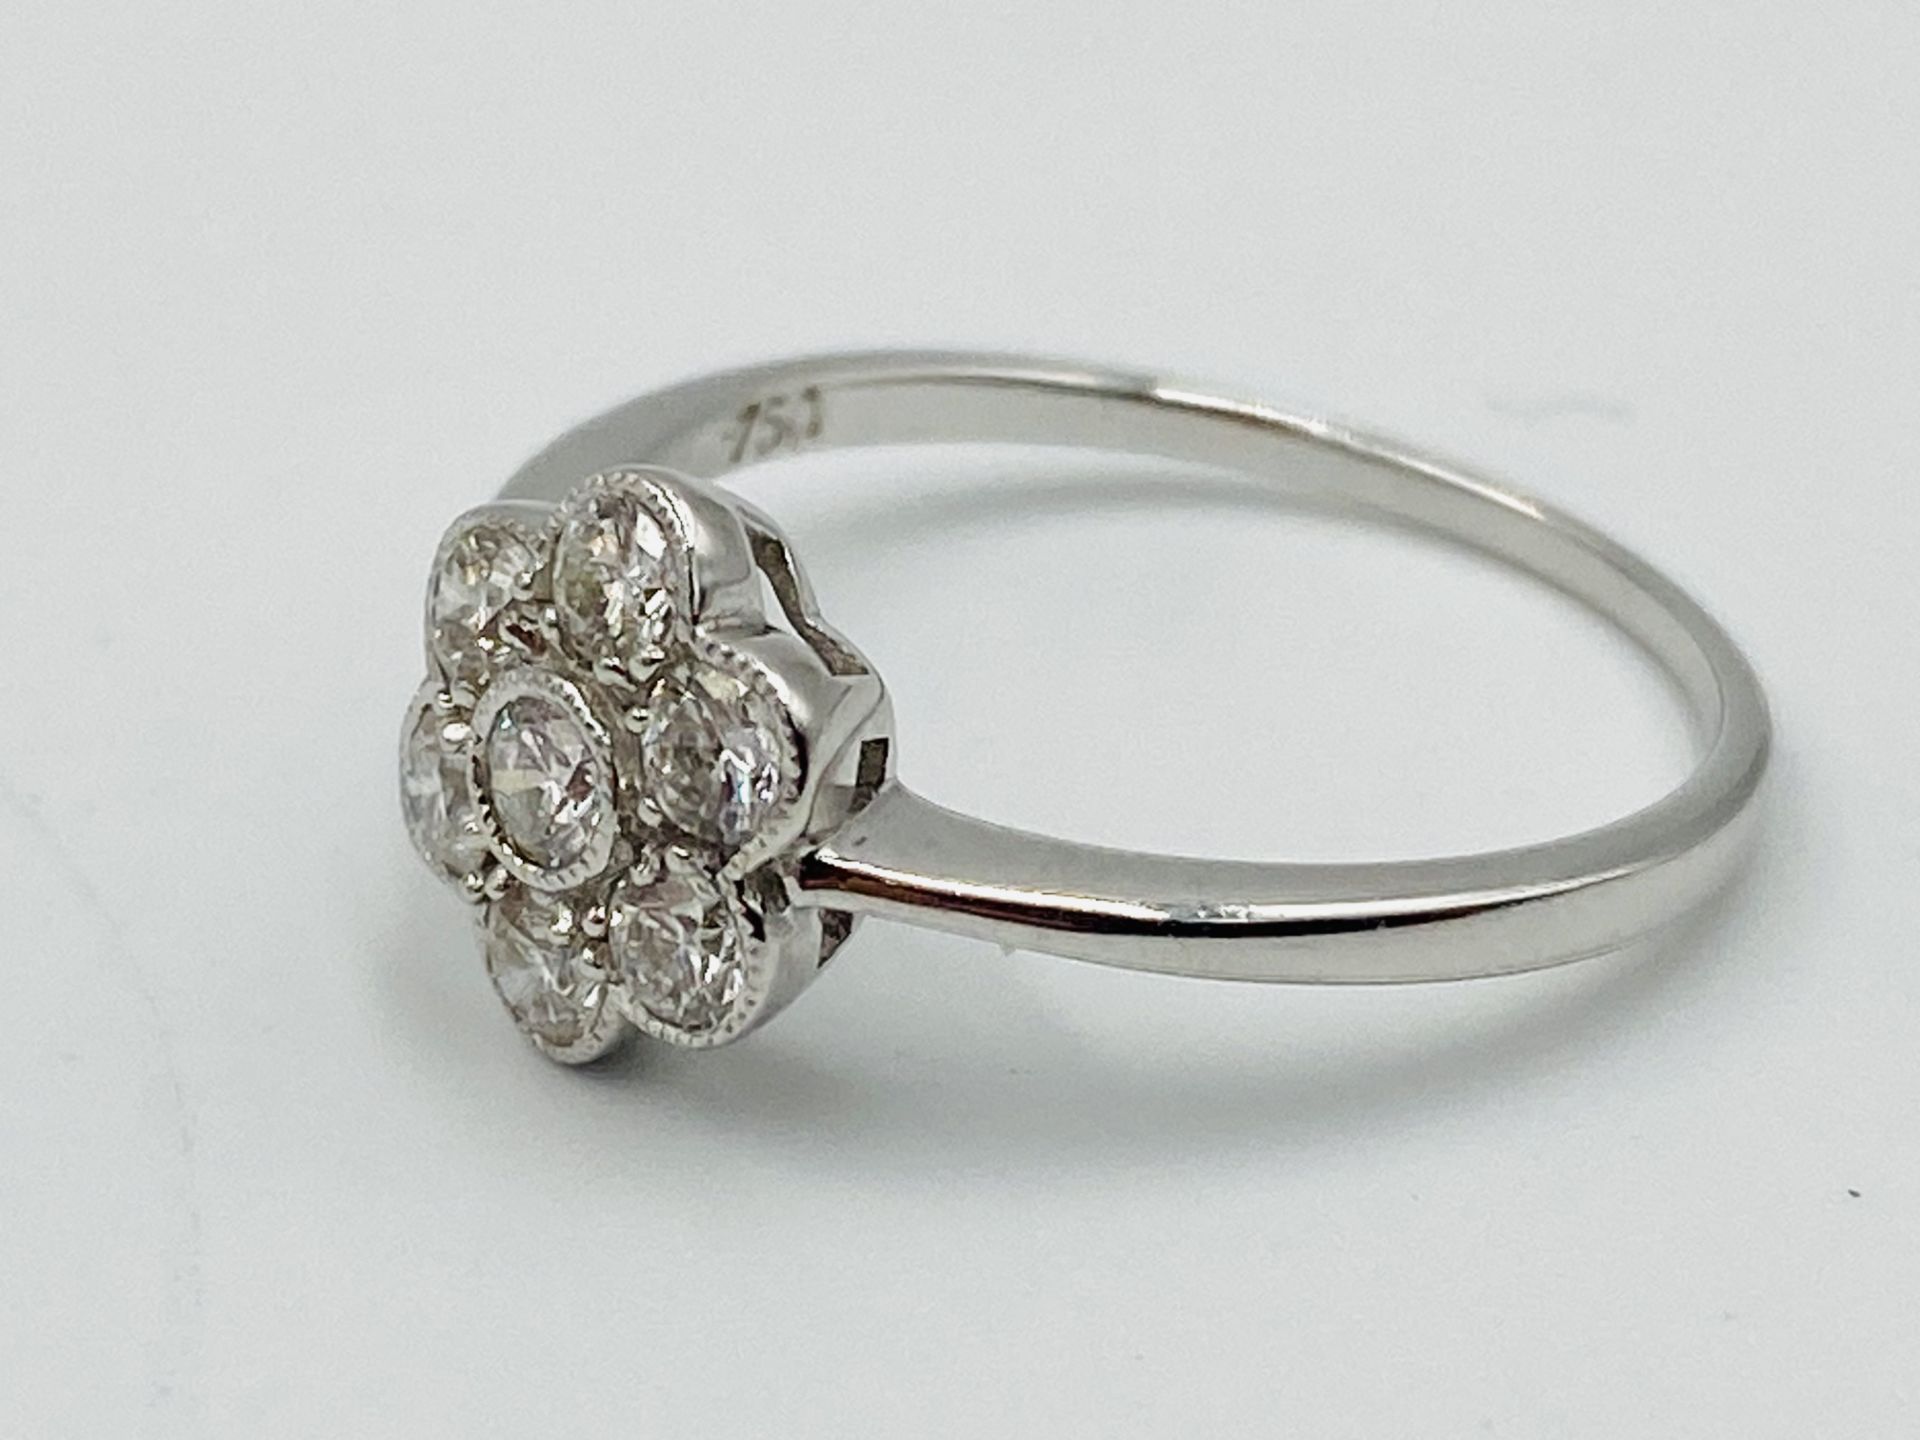 18ct white gold and diamond ring - Image 2 of 5